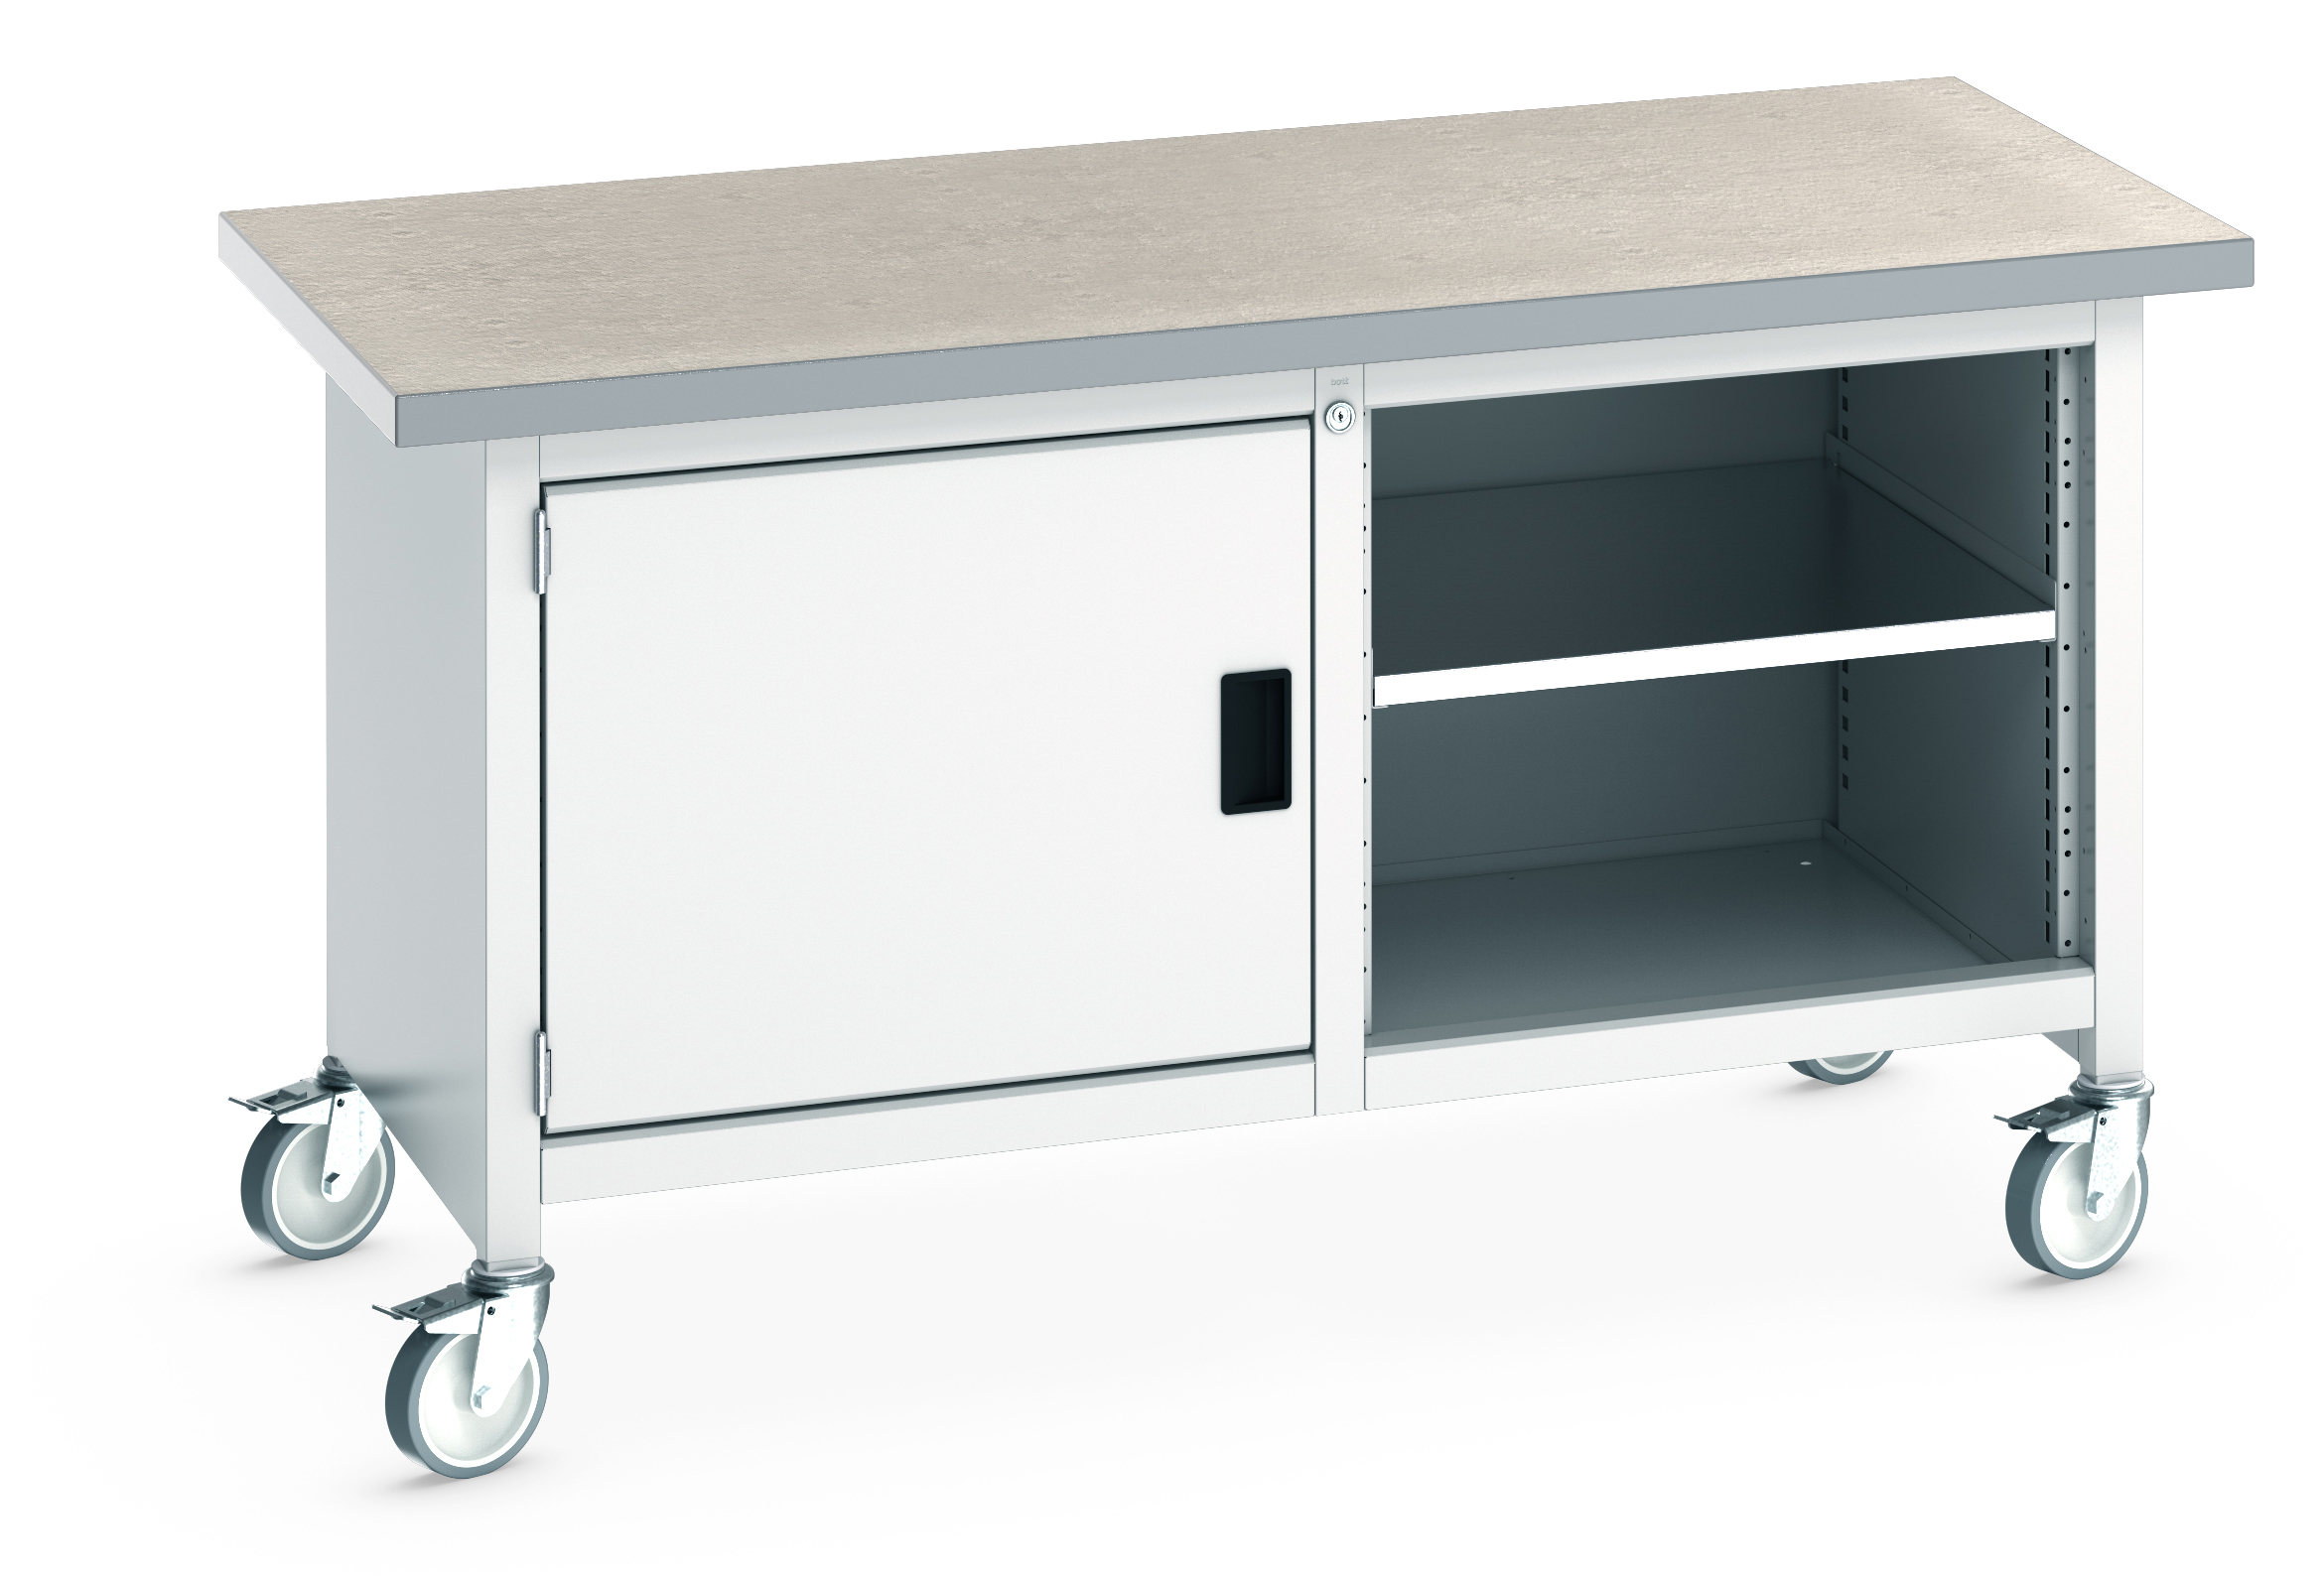 Bott Cubio Mobile Storage Bench With Full Cupboard / Open Cupboard - 41002096.16V